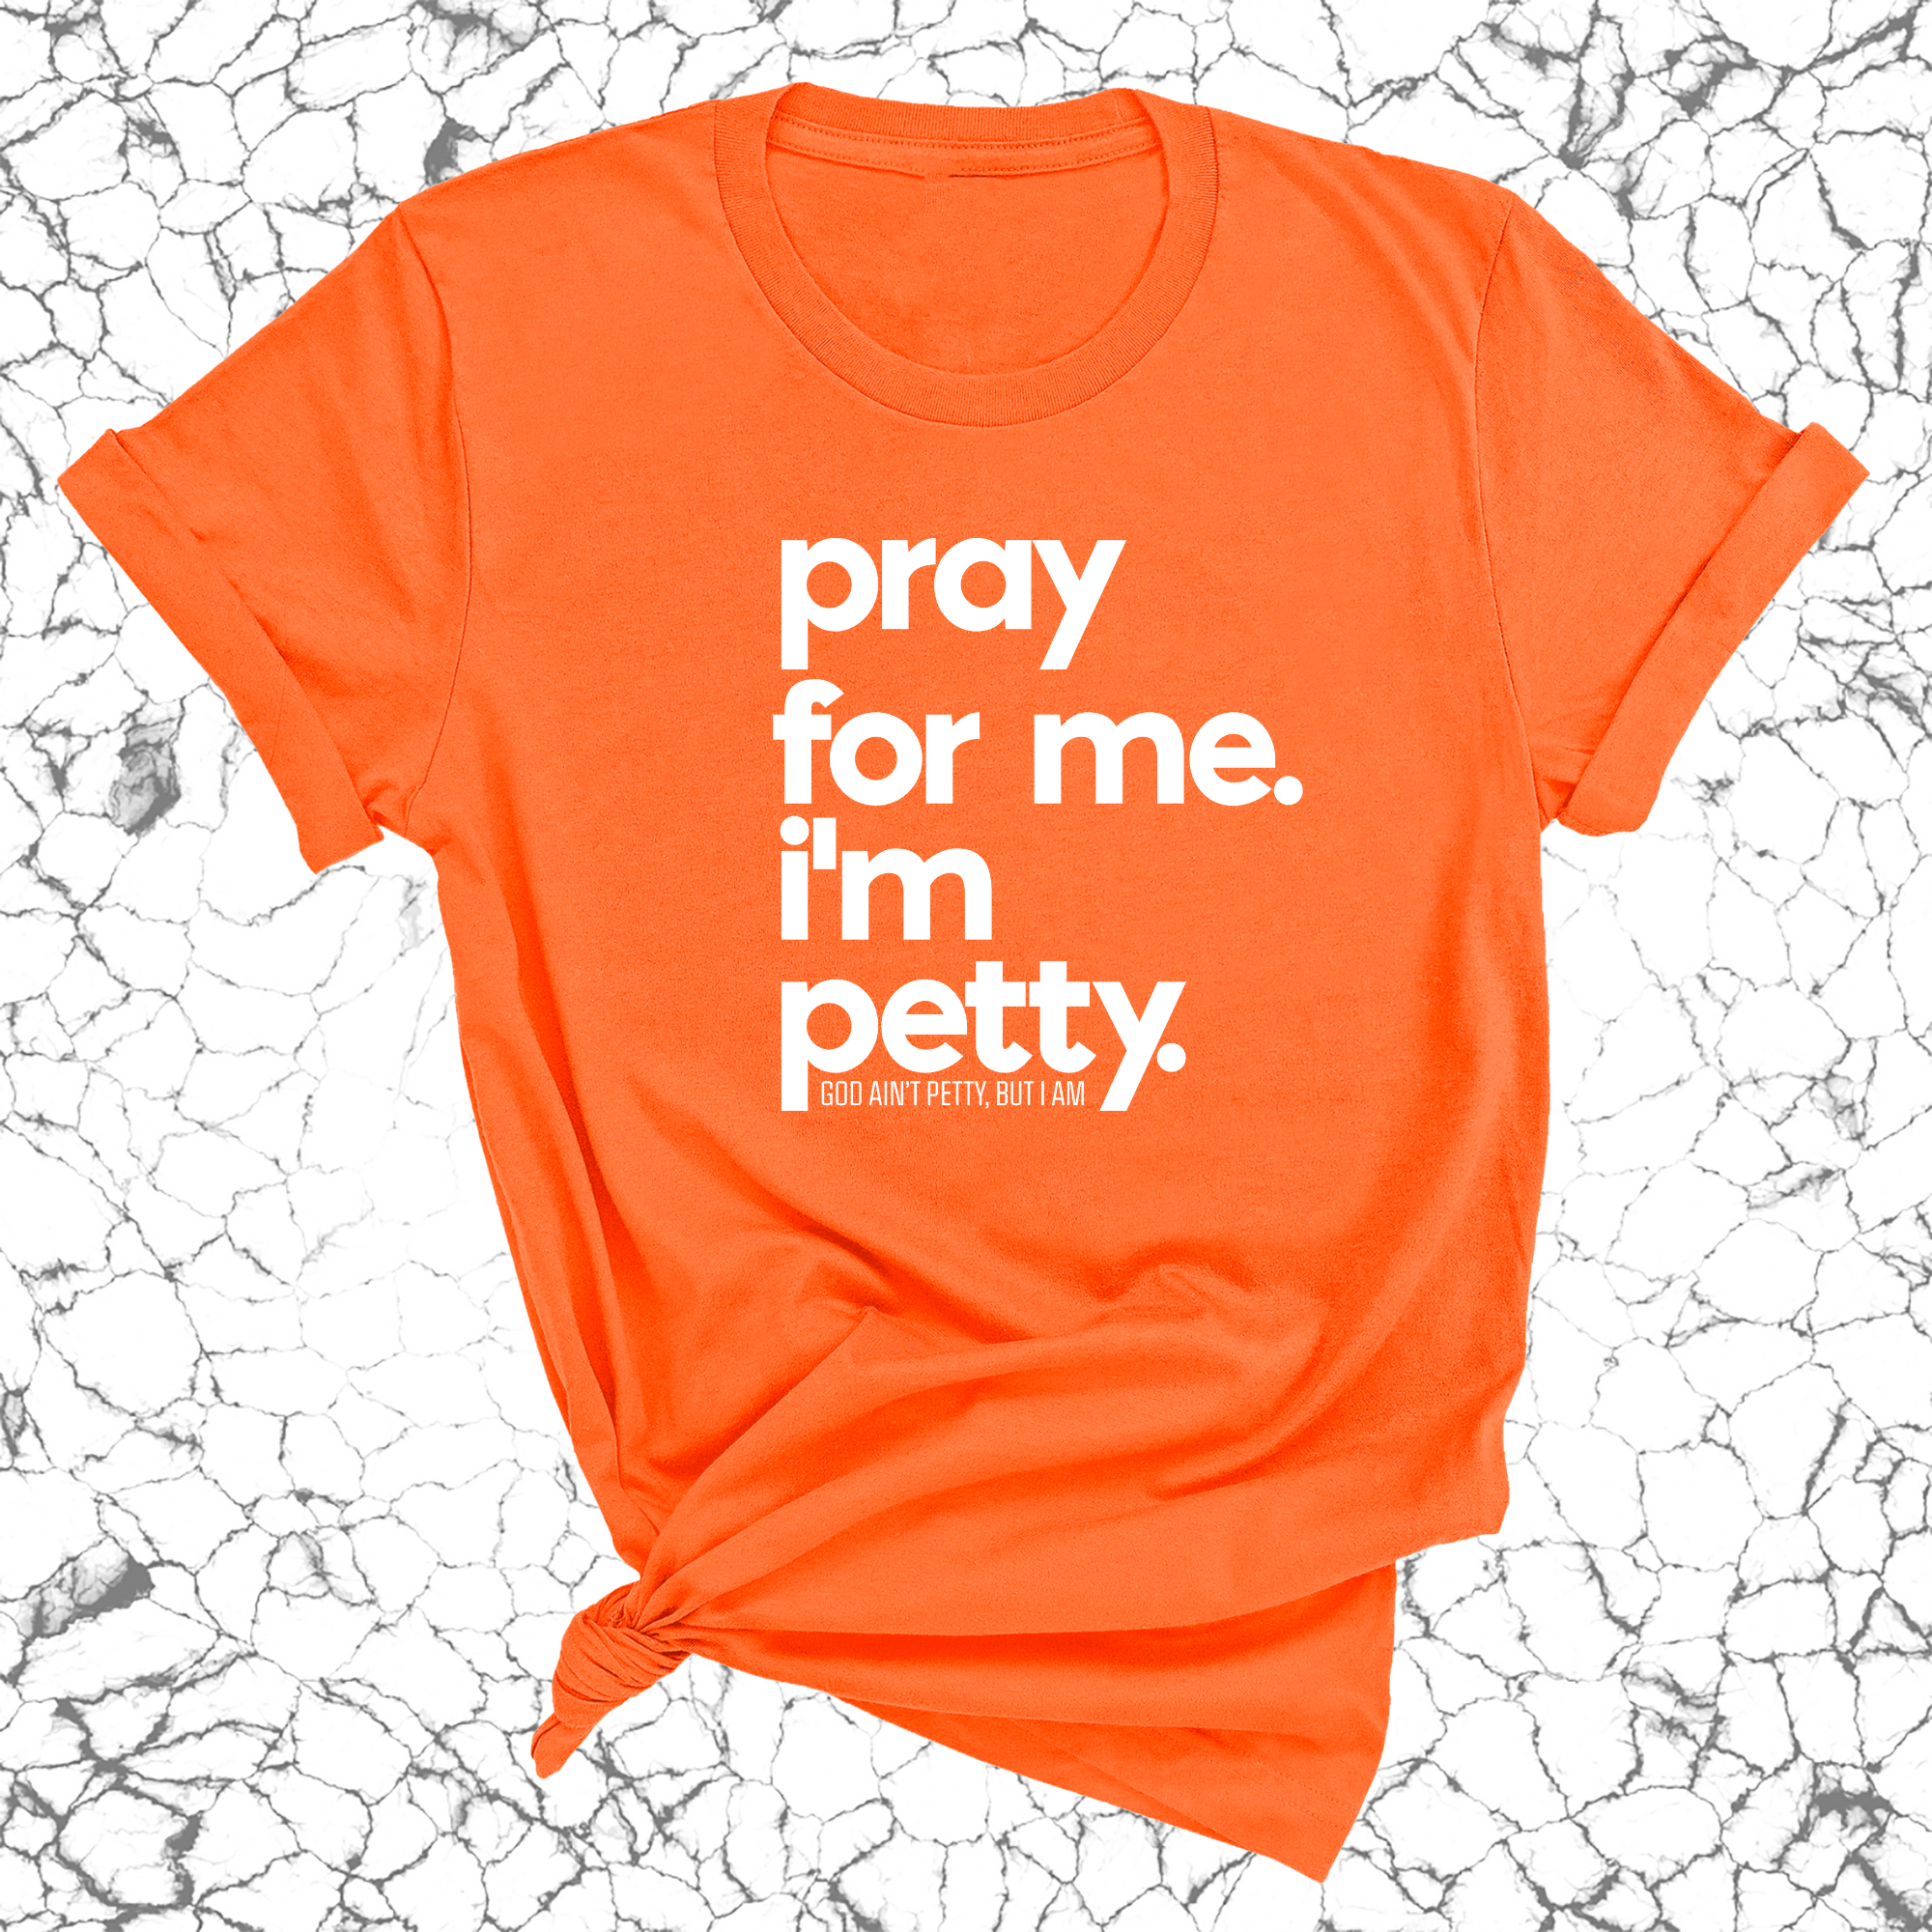 Pray for me. I'm Petty Unisex Tee *Limited Edition*-T-Shirt-The Original God Ain't Petty But I Am